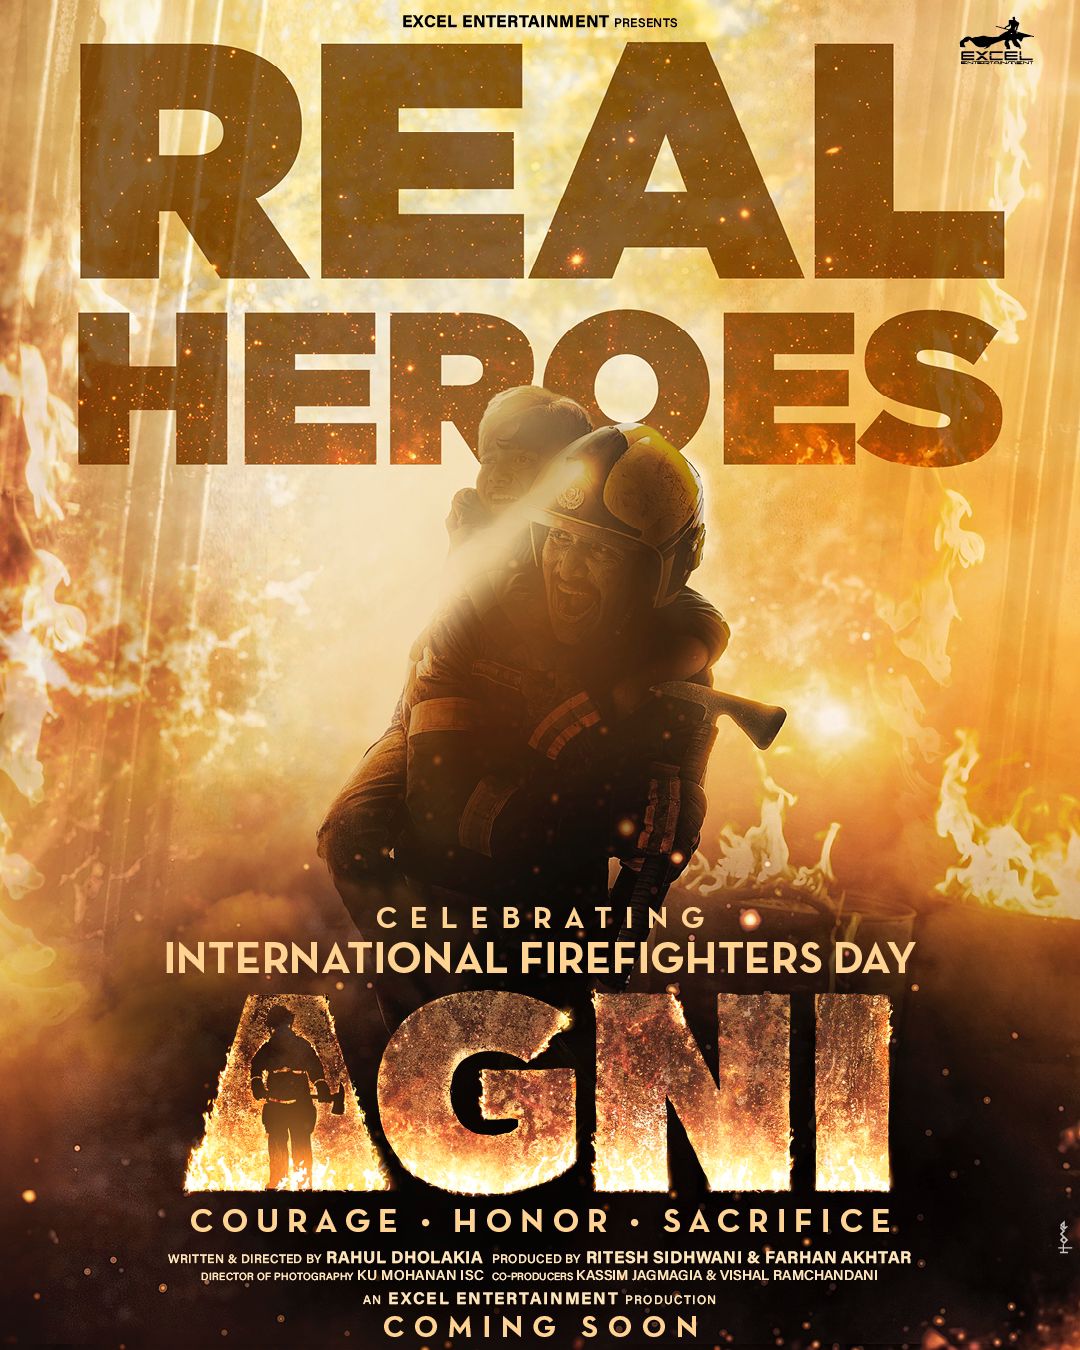 International FireFighters Day,Agni First Poster Release,Pratik Gandhi Agni, Agni First Poster, pratik gandhi upcoming film agni release date, agni poster out, agni poster release, upcoming film agni, Pratik gandhi divyendu Film agni